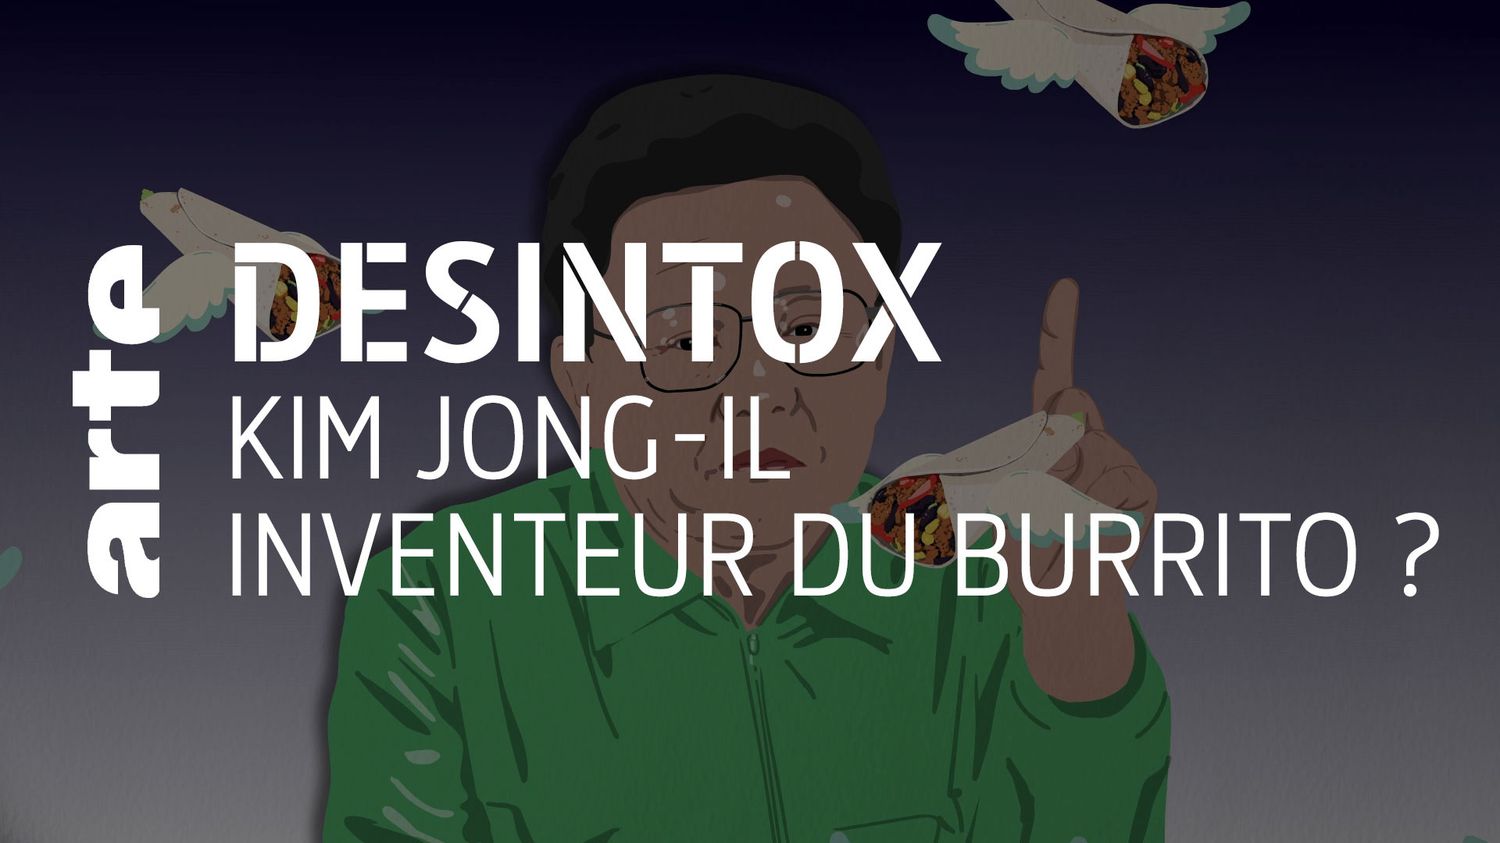  Detox.  No, Kim Jong-il did not claim to have invented the burrito in 2011
